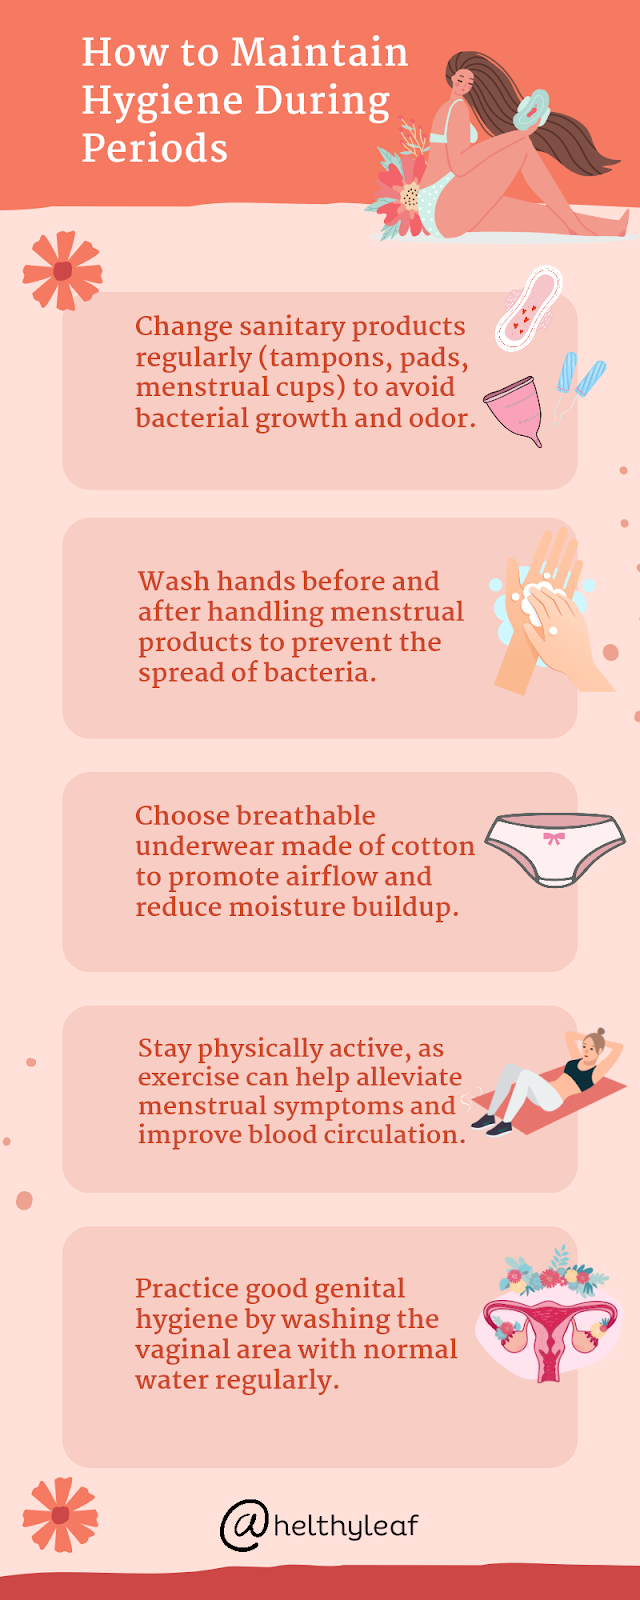 How to Maintain Hygiene During Period